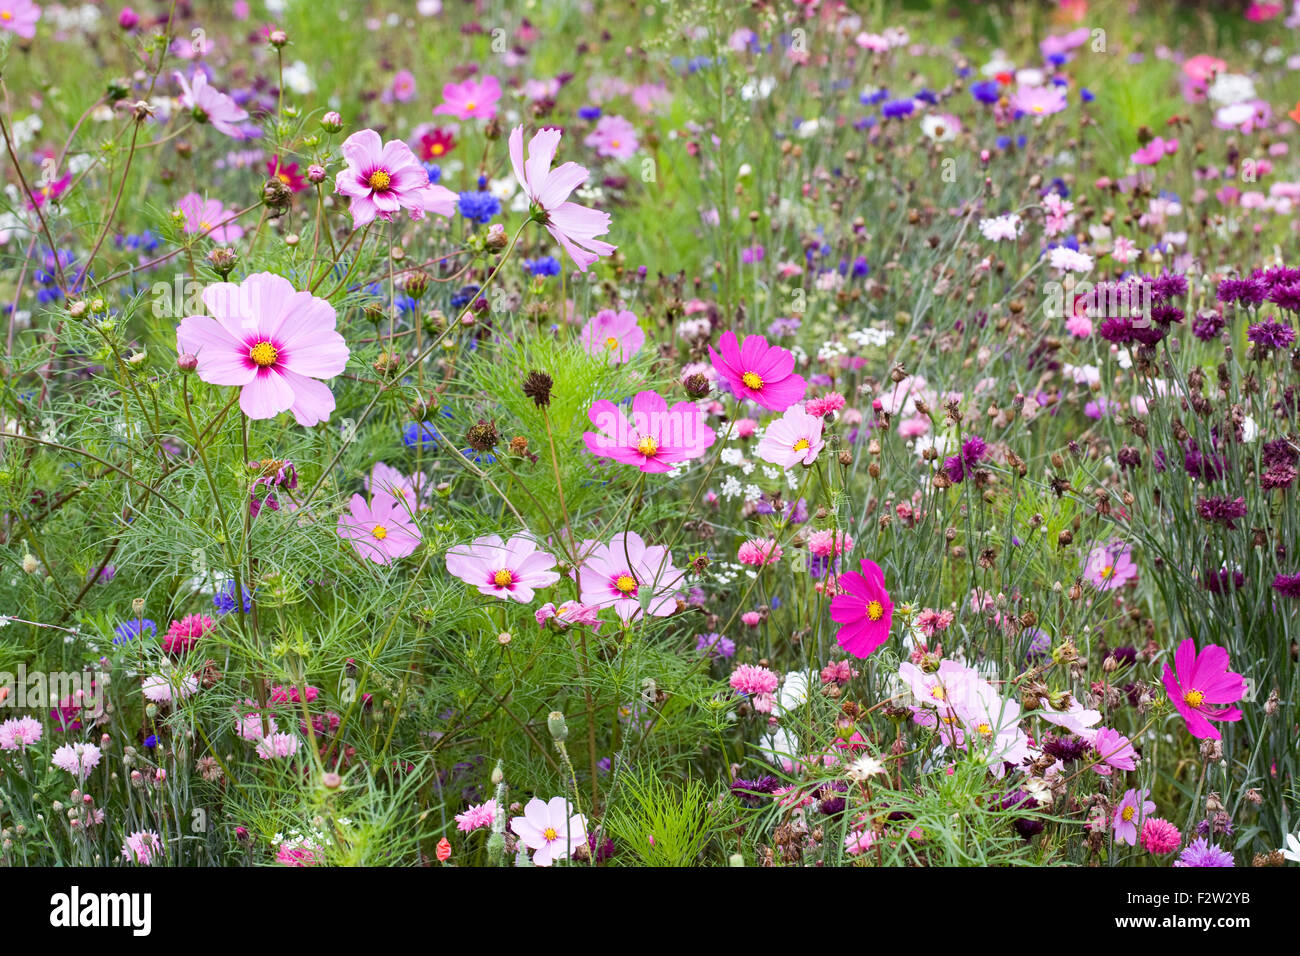 Flower meadow in late summer. Stock Photo